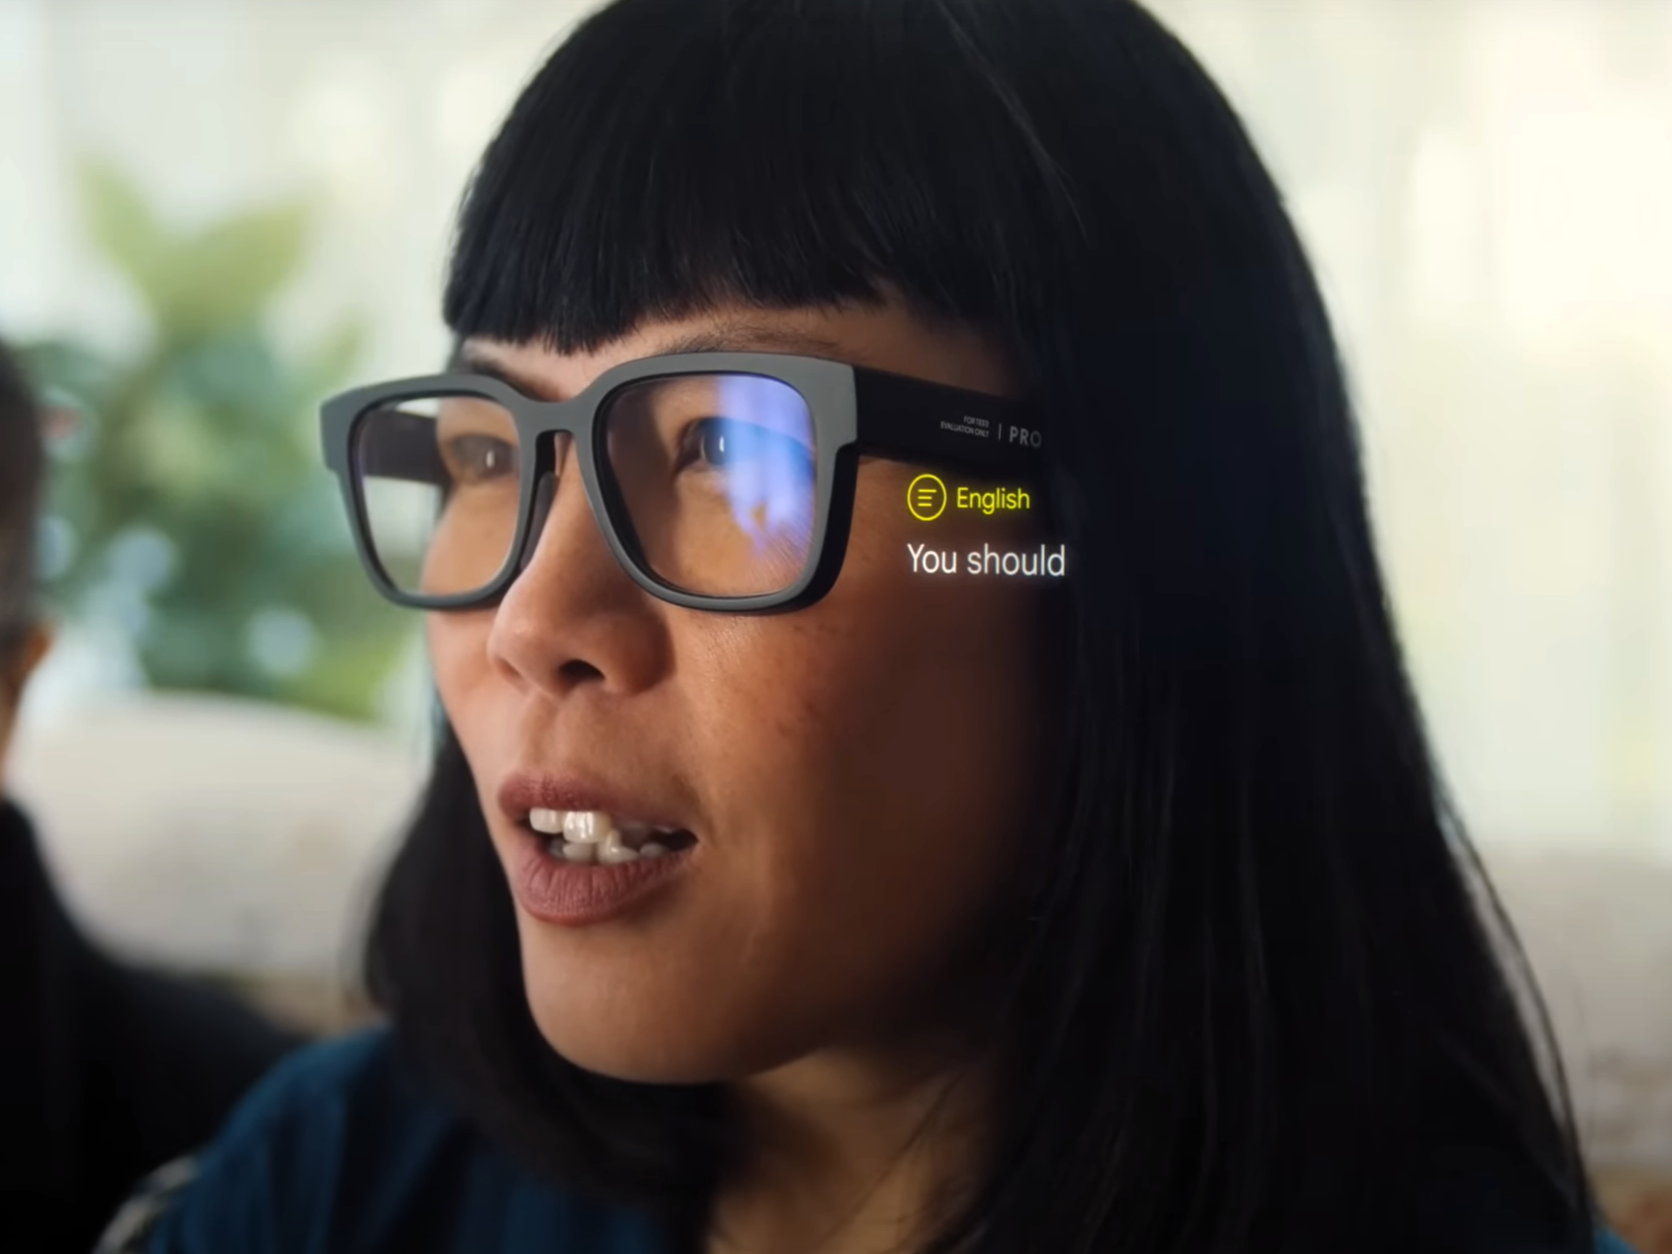 A video showing off Google’s augmented reality glasses was shared during the tech giant’s Google I/O developers conference in 2022